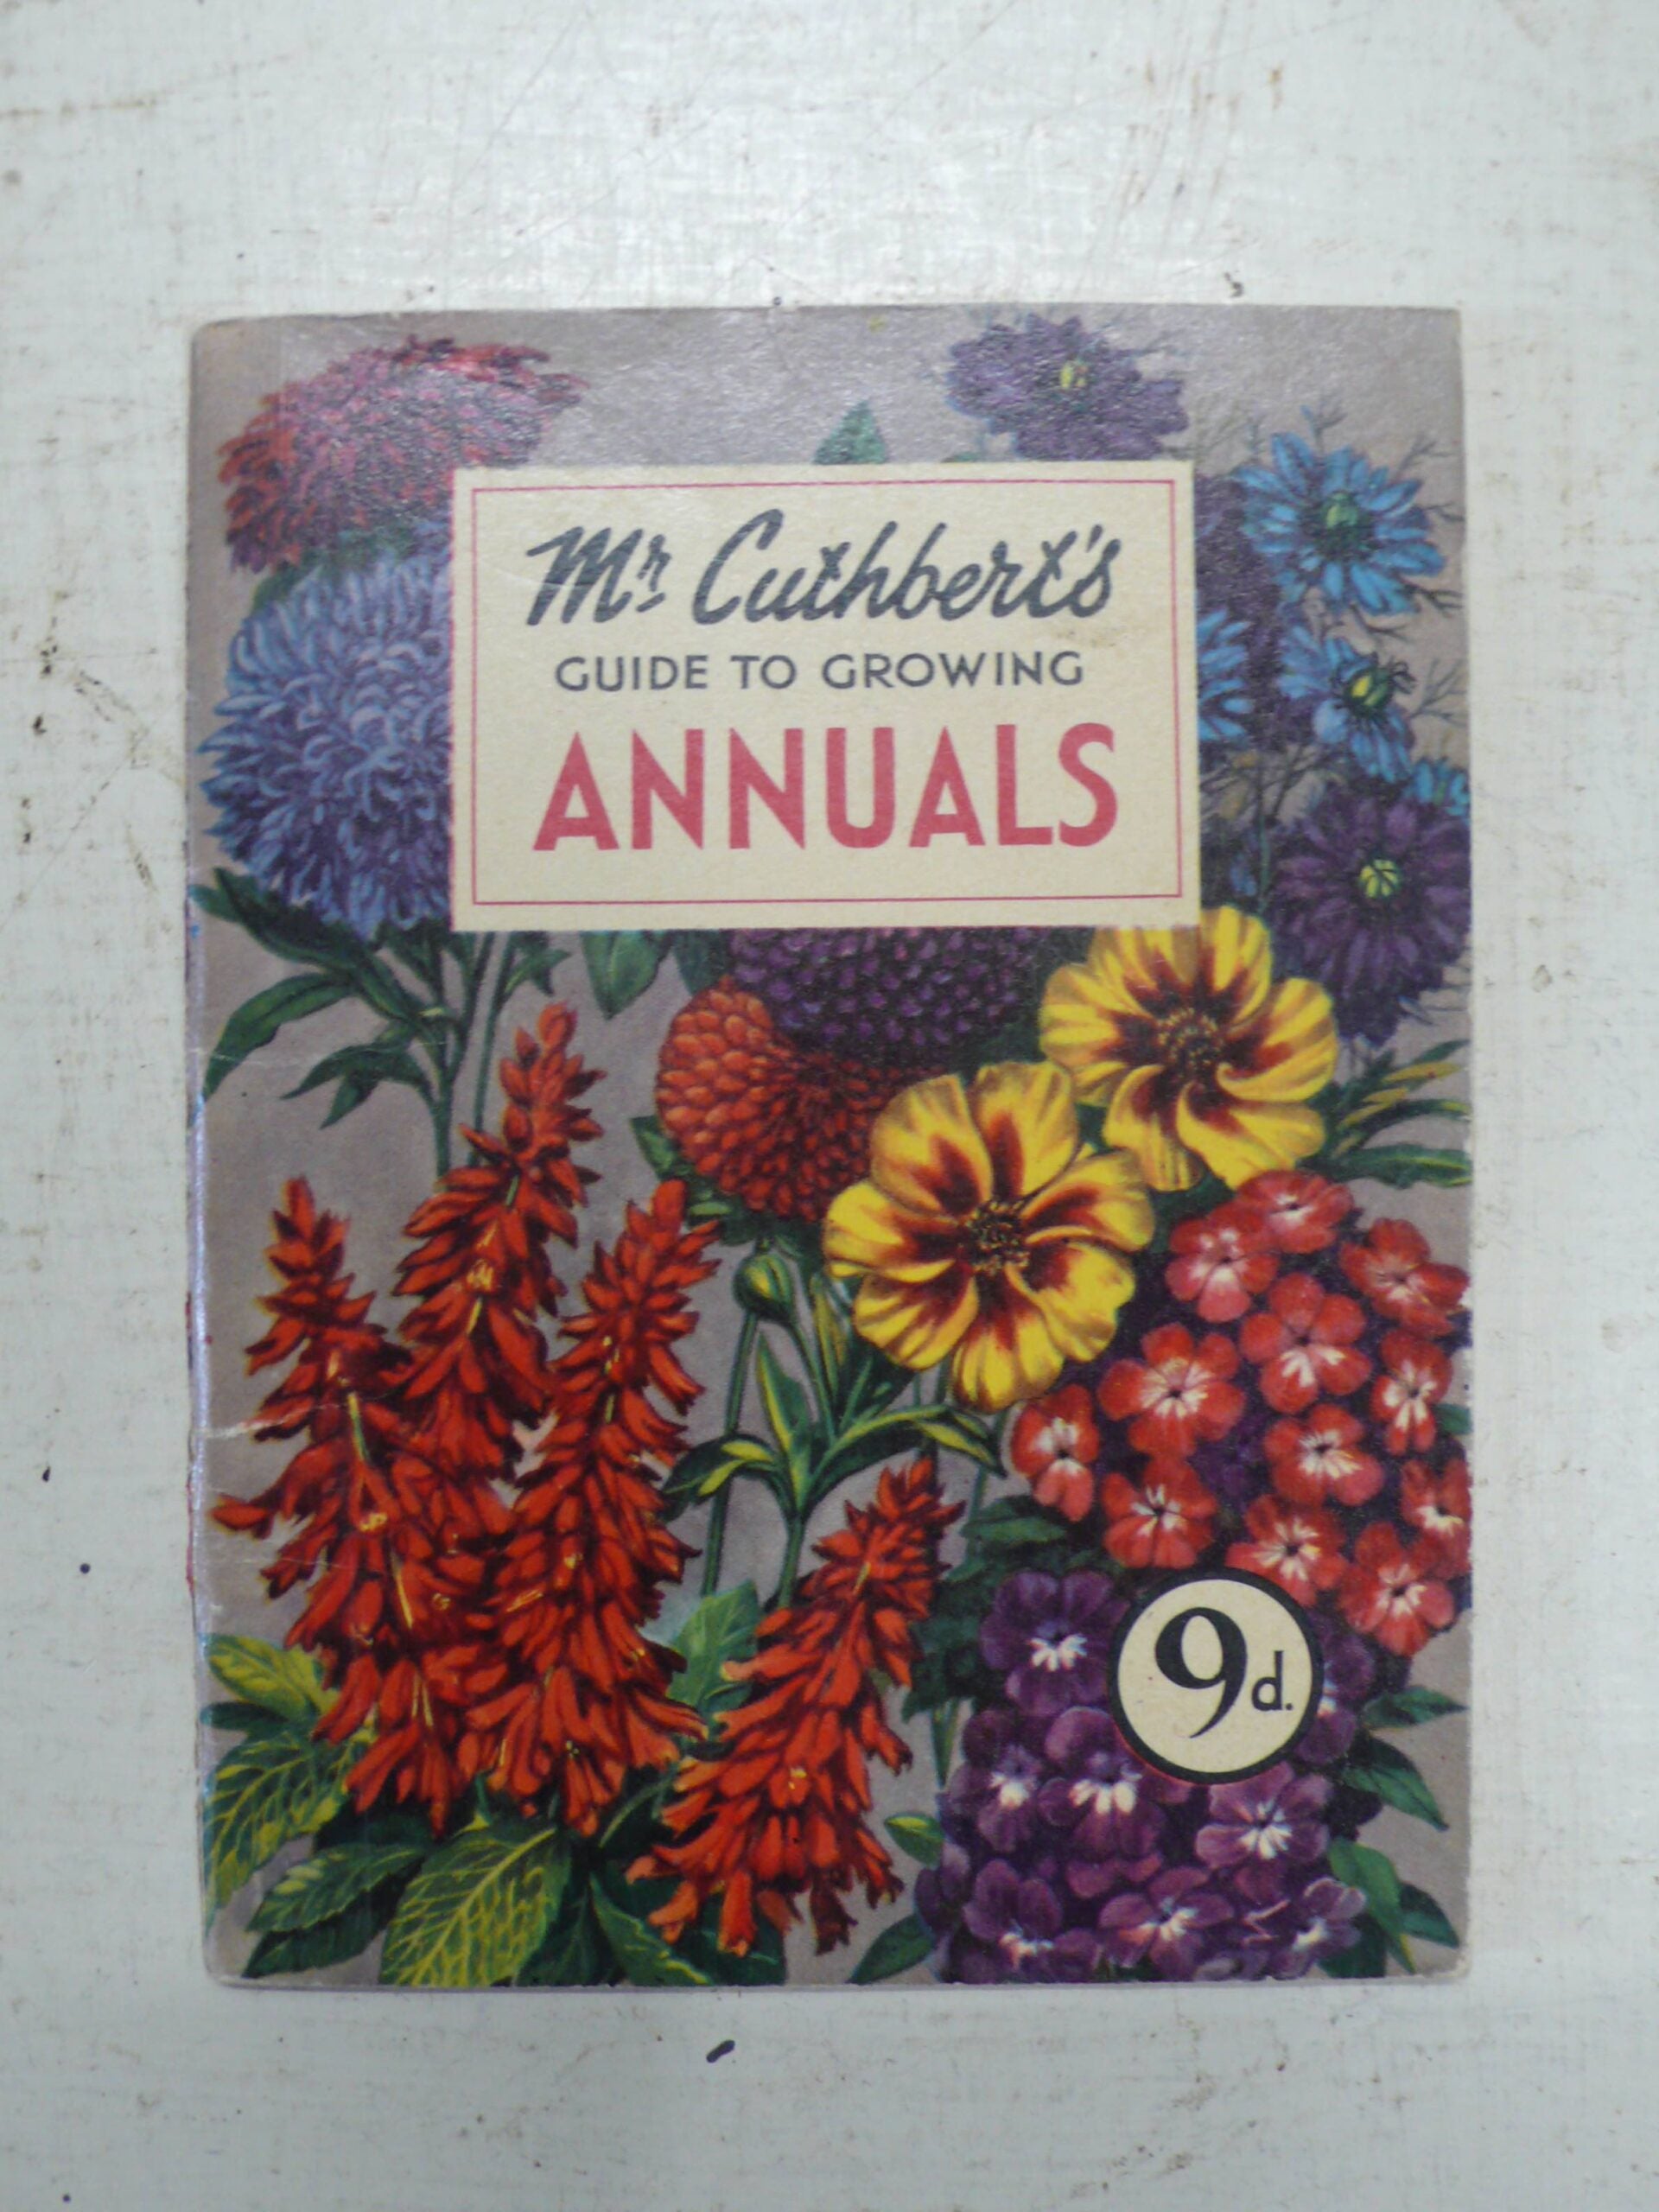 Mr Cuthberts Annuals Guide